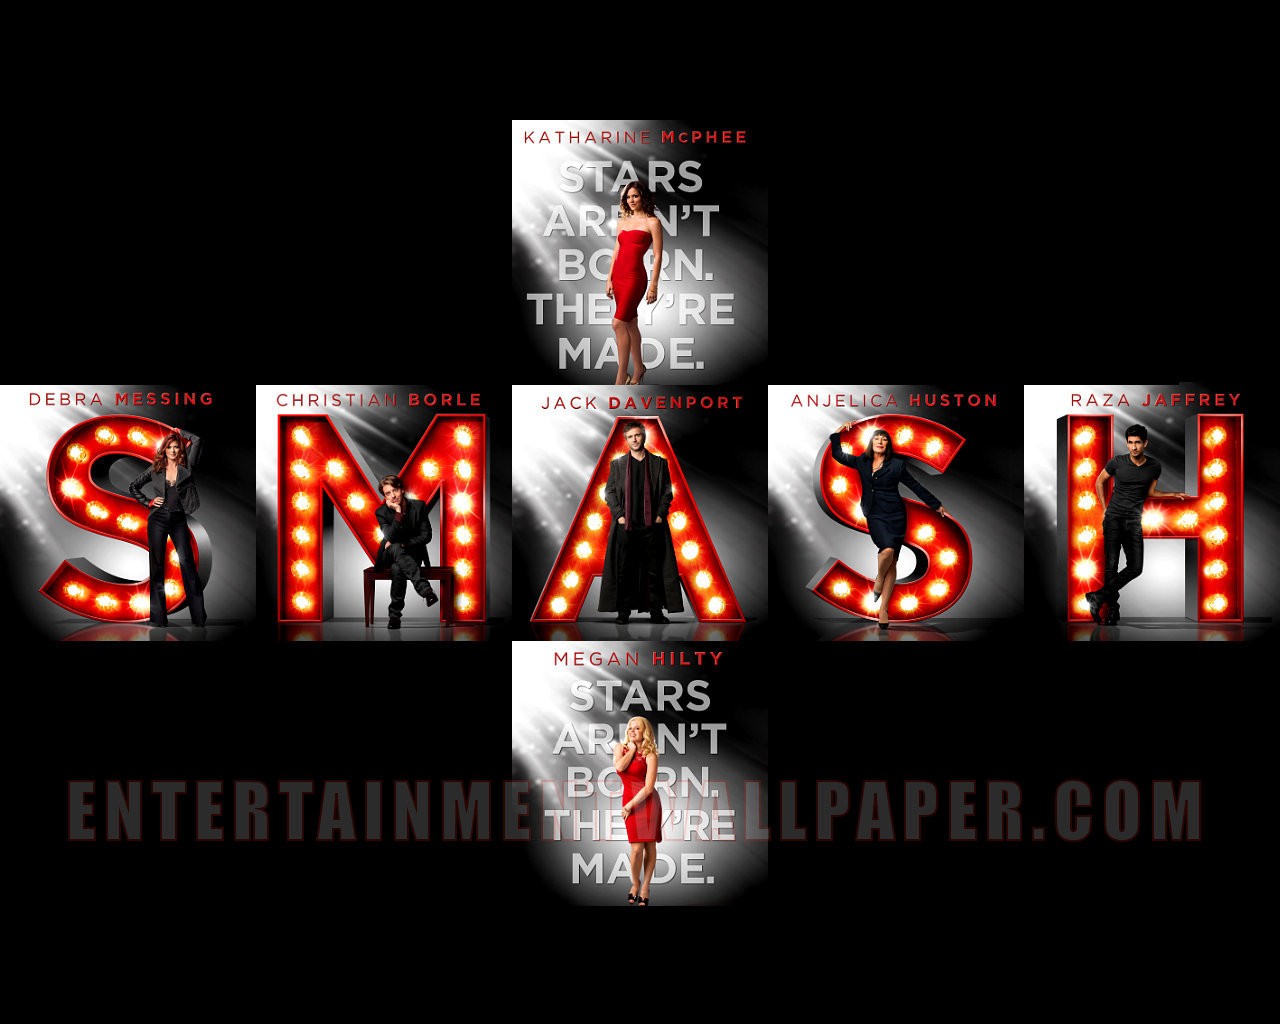 Smash Image HD Wallpaper And Background Photos